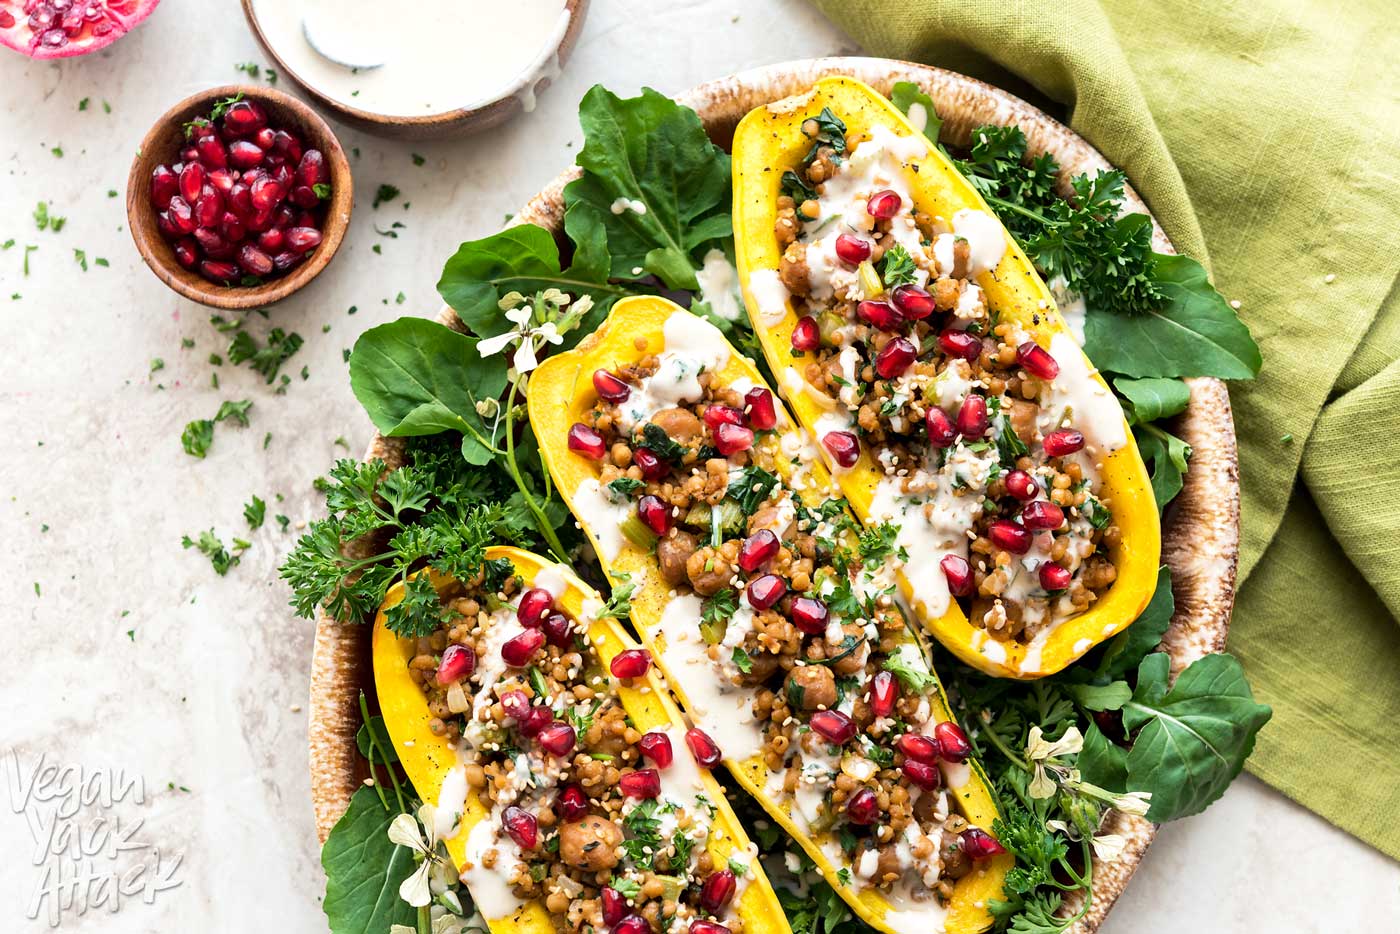 These Couscous-Stuffed Delicata Squash make for a beautiful and comforting dish, to adorn your holiday table, this year! Made with Wild Garden Pilaf. #vegan #soyfree #nutfree #WildGardenEats